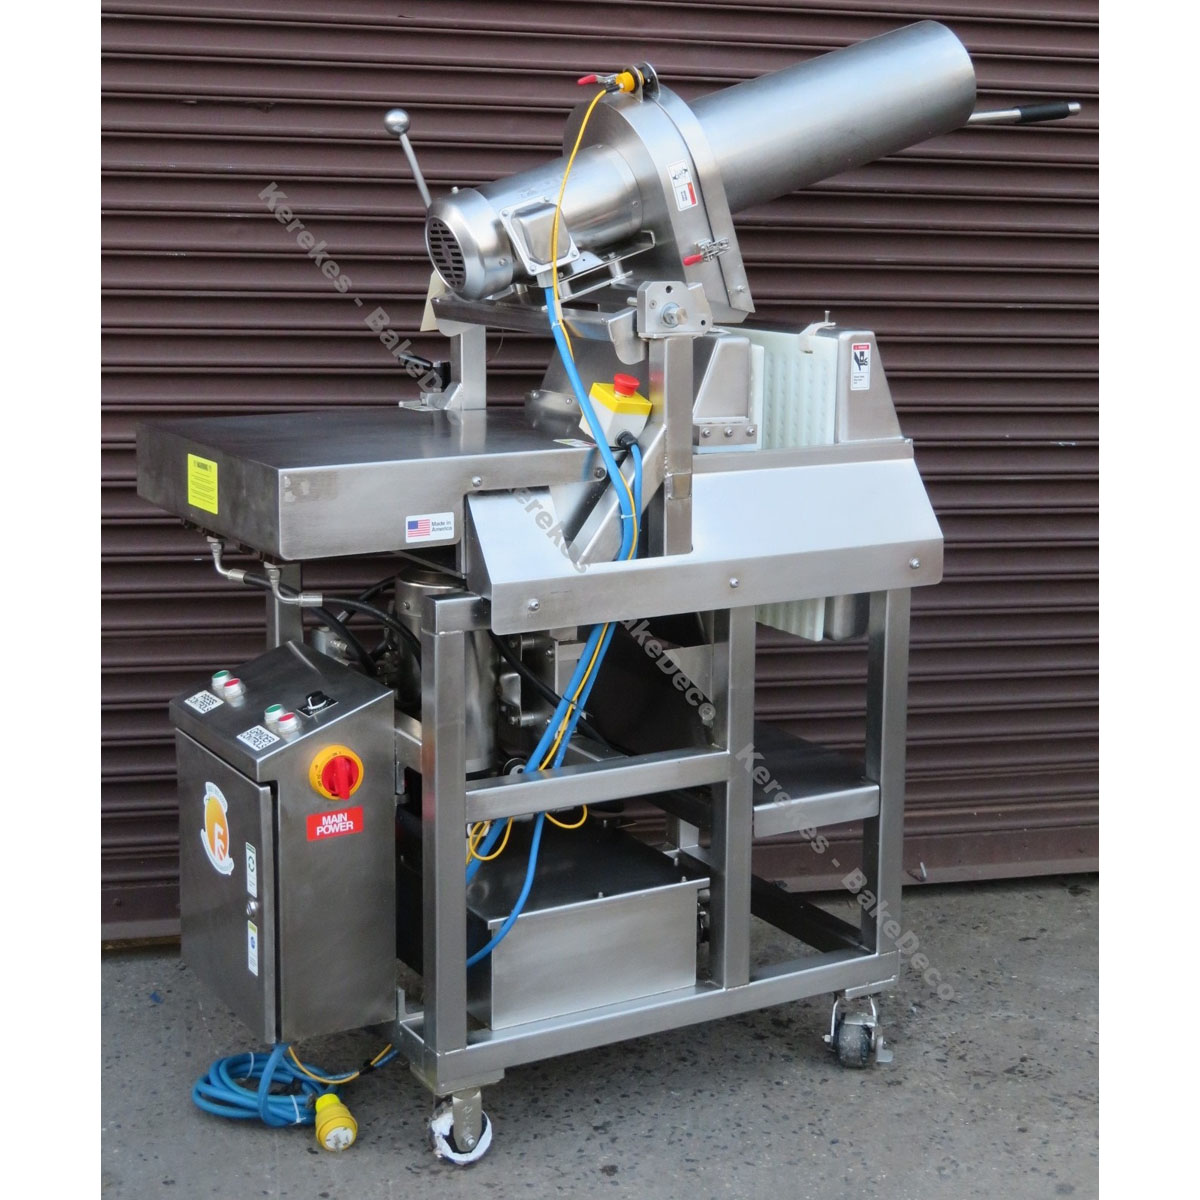 Pressed Right PR-100 Juice Press, Used Great Condition image 4